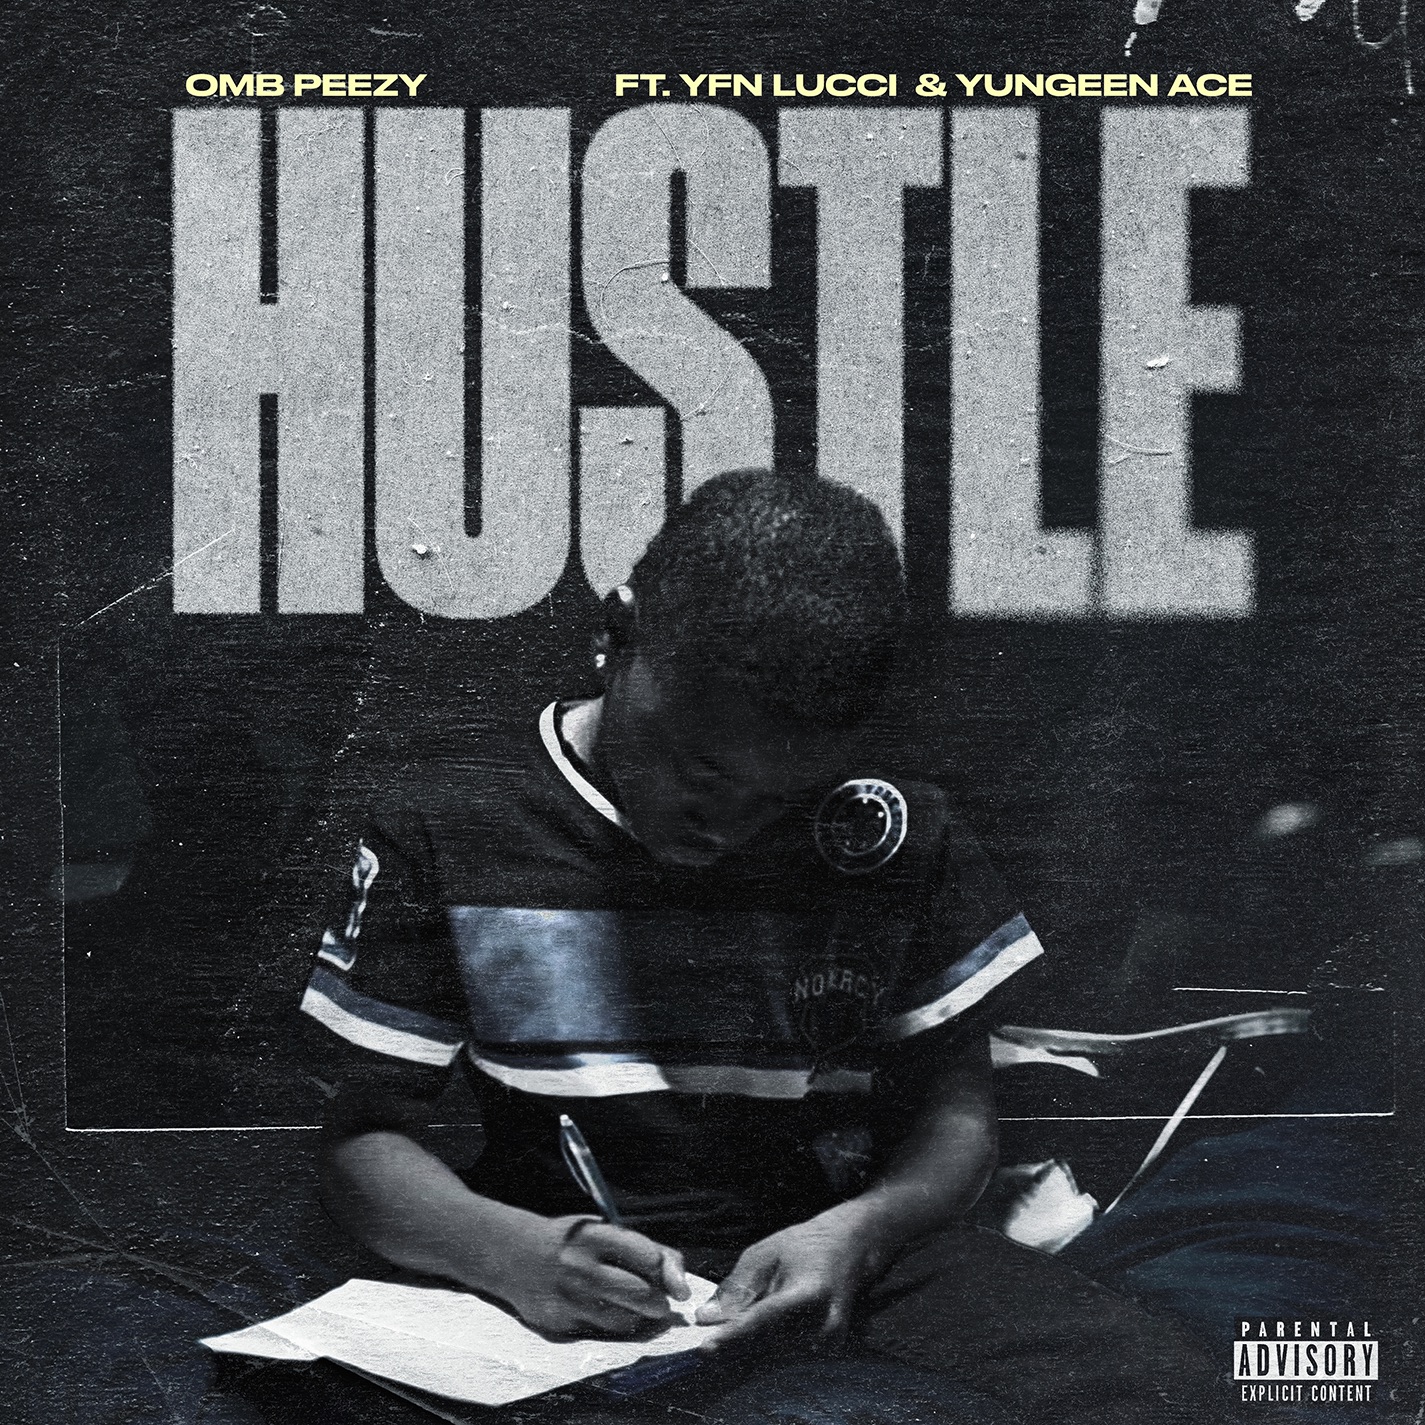 OMB Peezy - Hustle (feat. YFN Lucci & Yungeen Ace) - Single